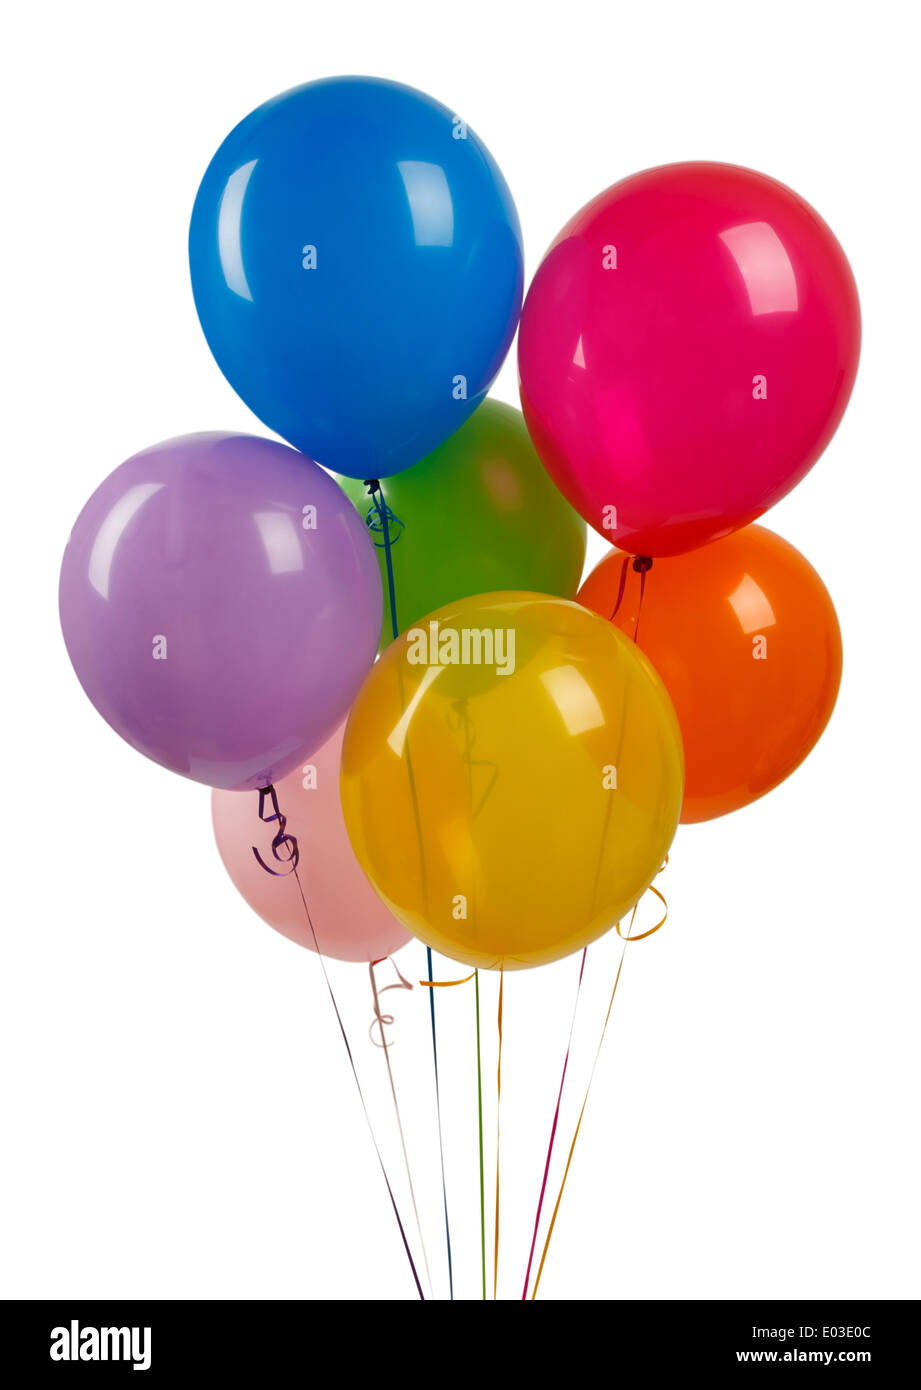 Colorful Balloons Isolated On White Background. Stock Photo